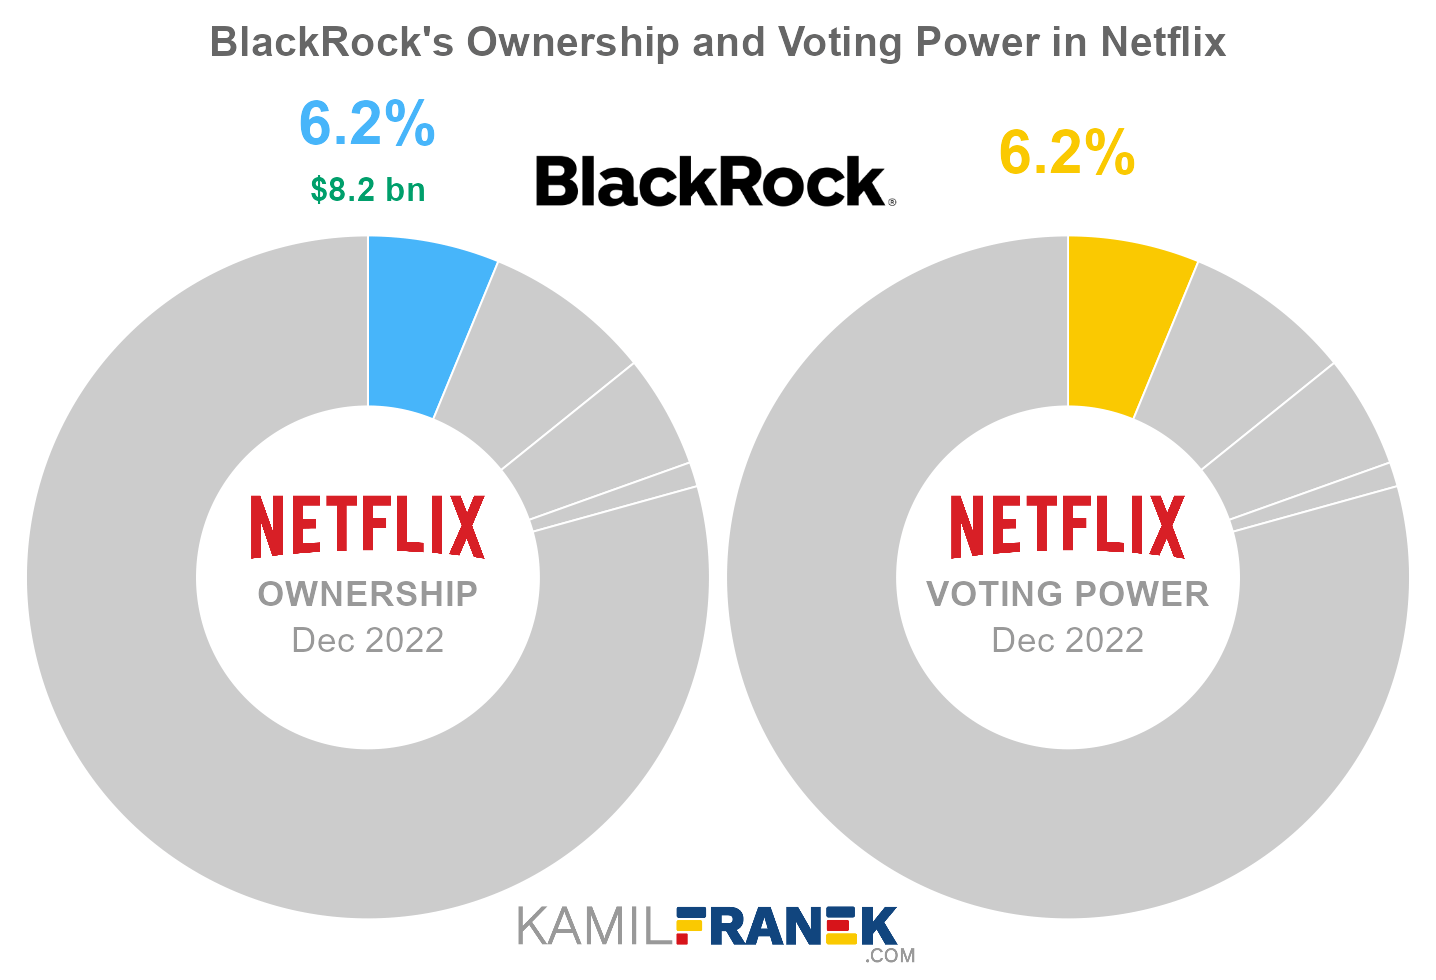 BlackRock's share ownership and voting power in Netflix (chart)